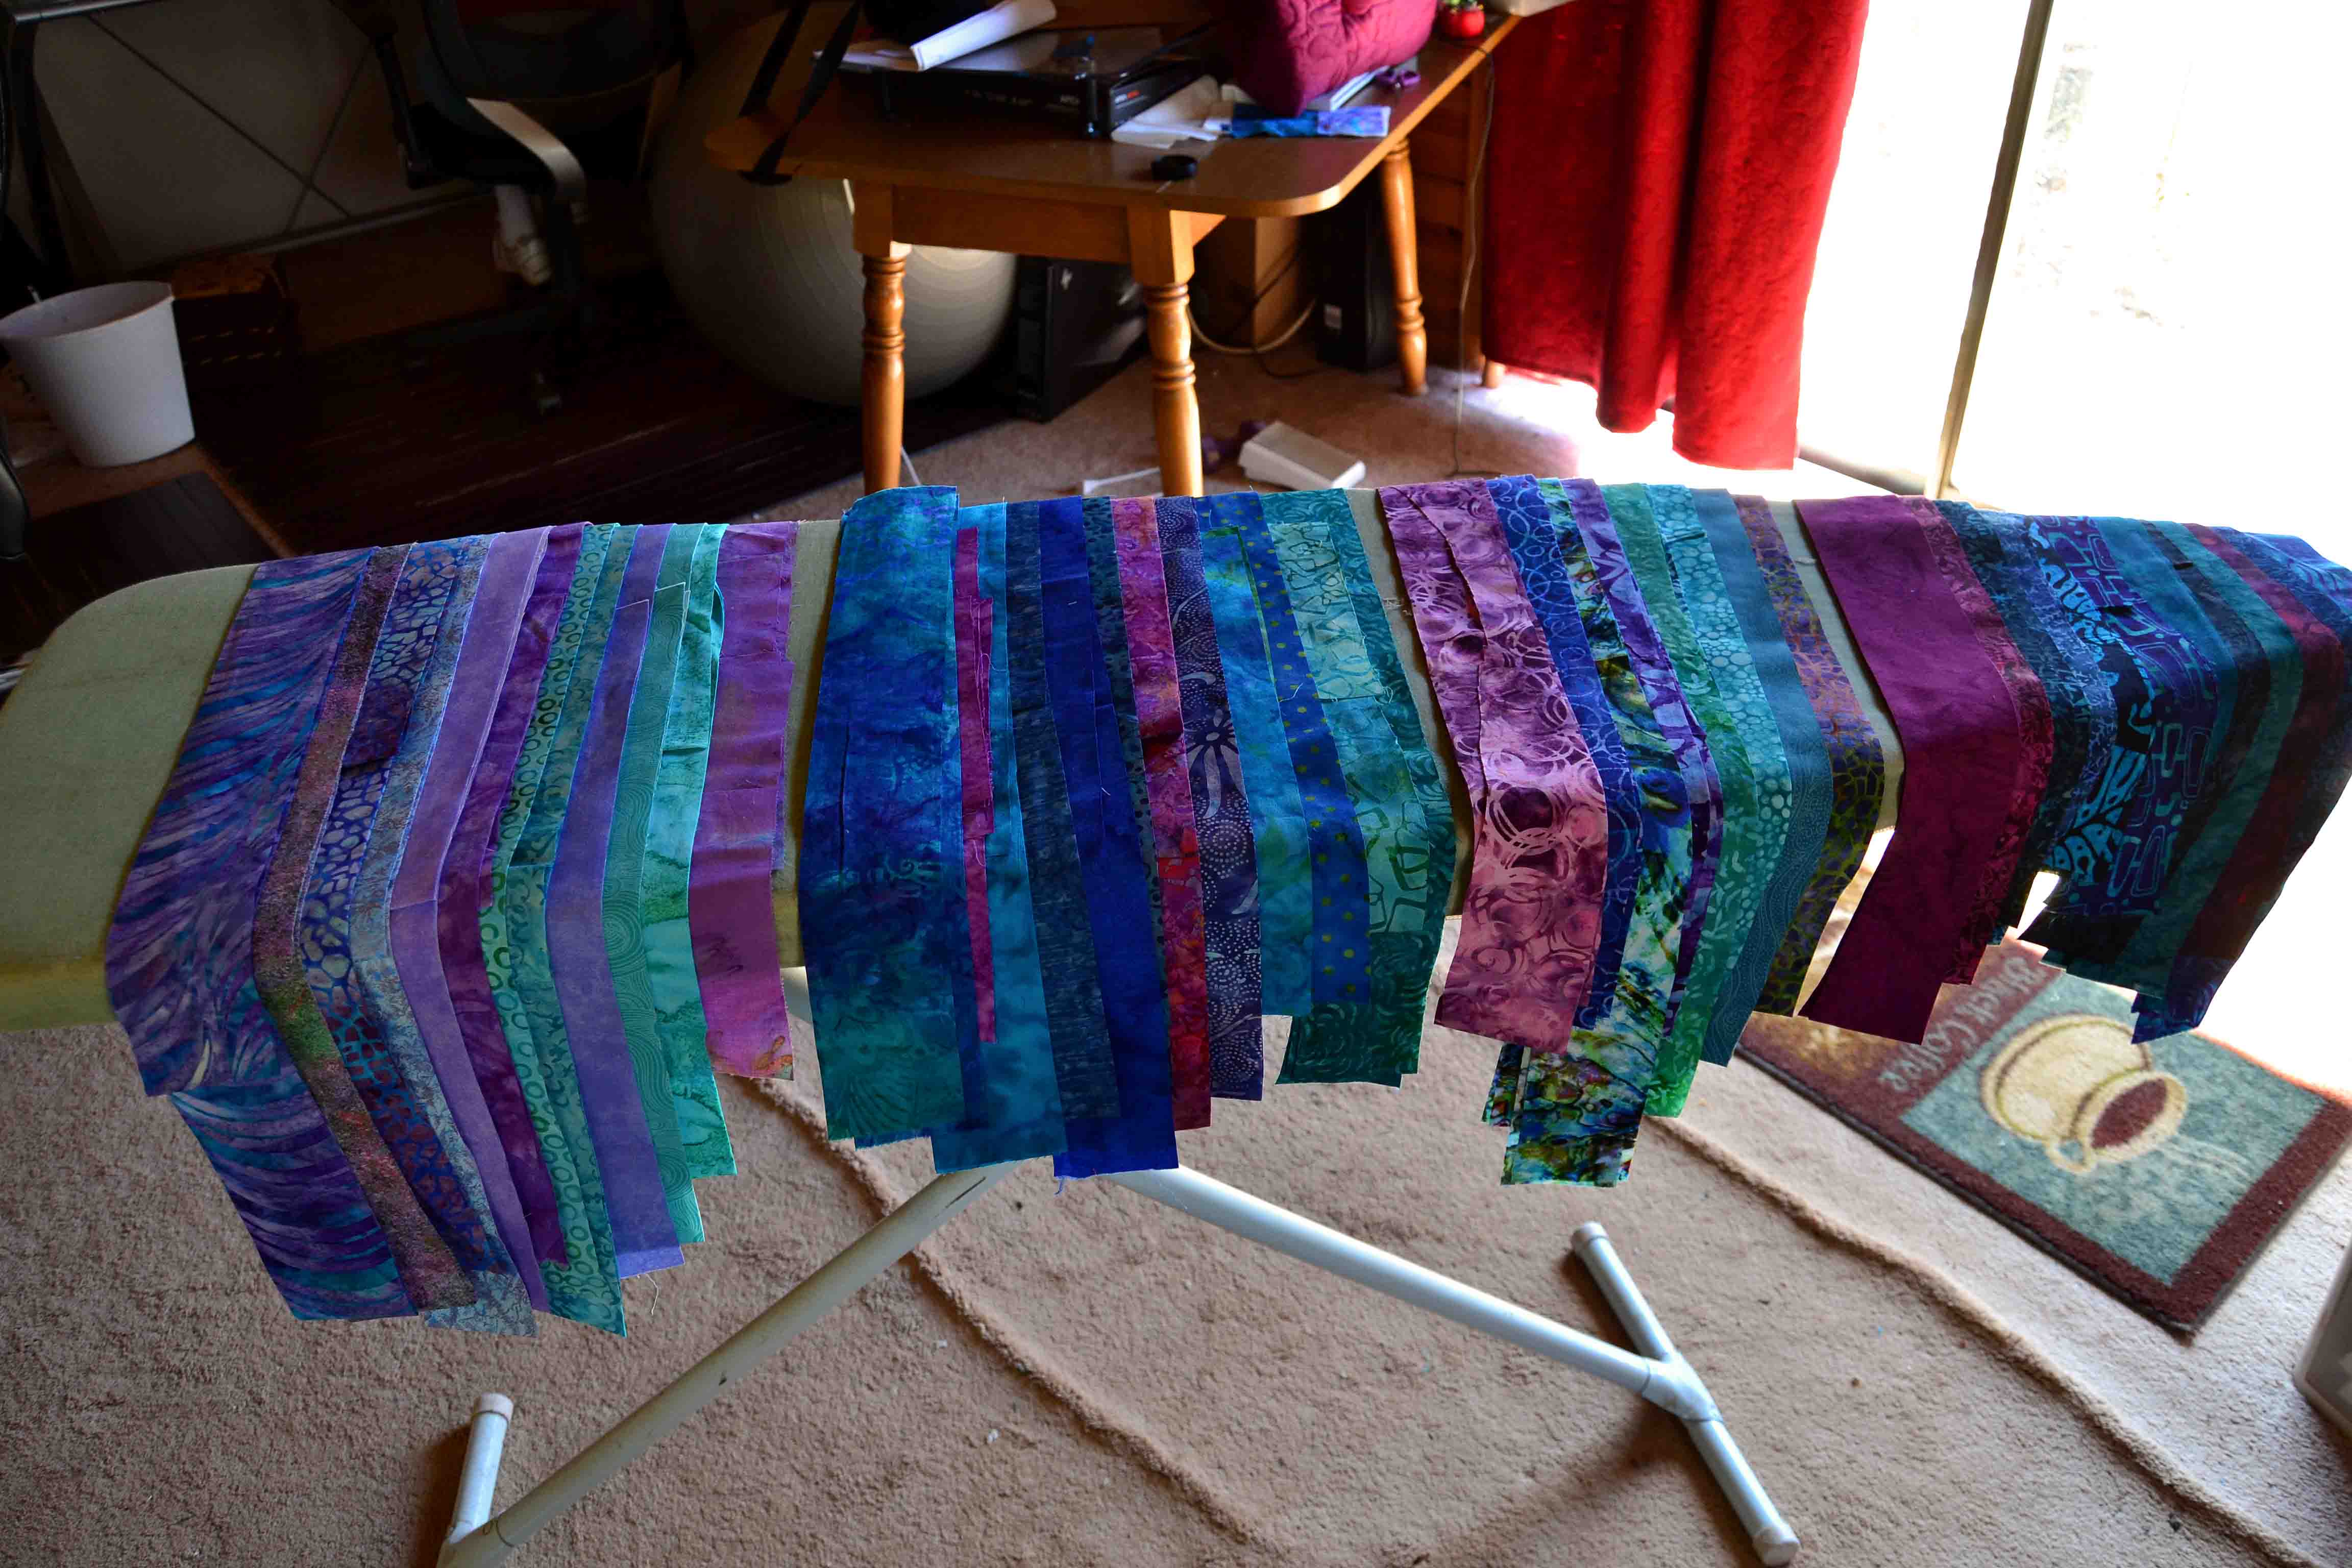 Show strips of fabric laid out over an ironing board